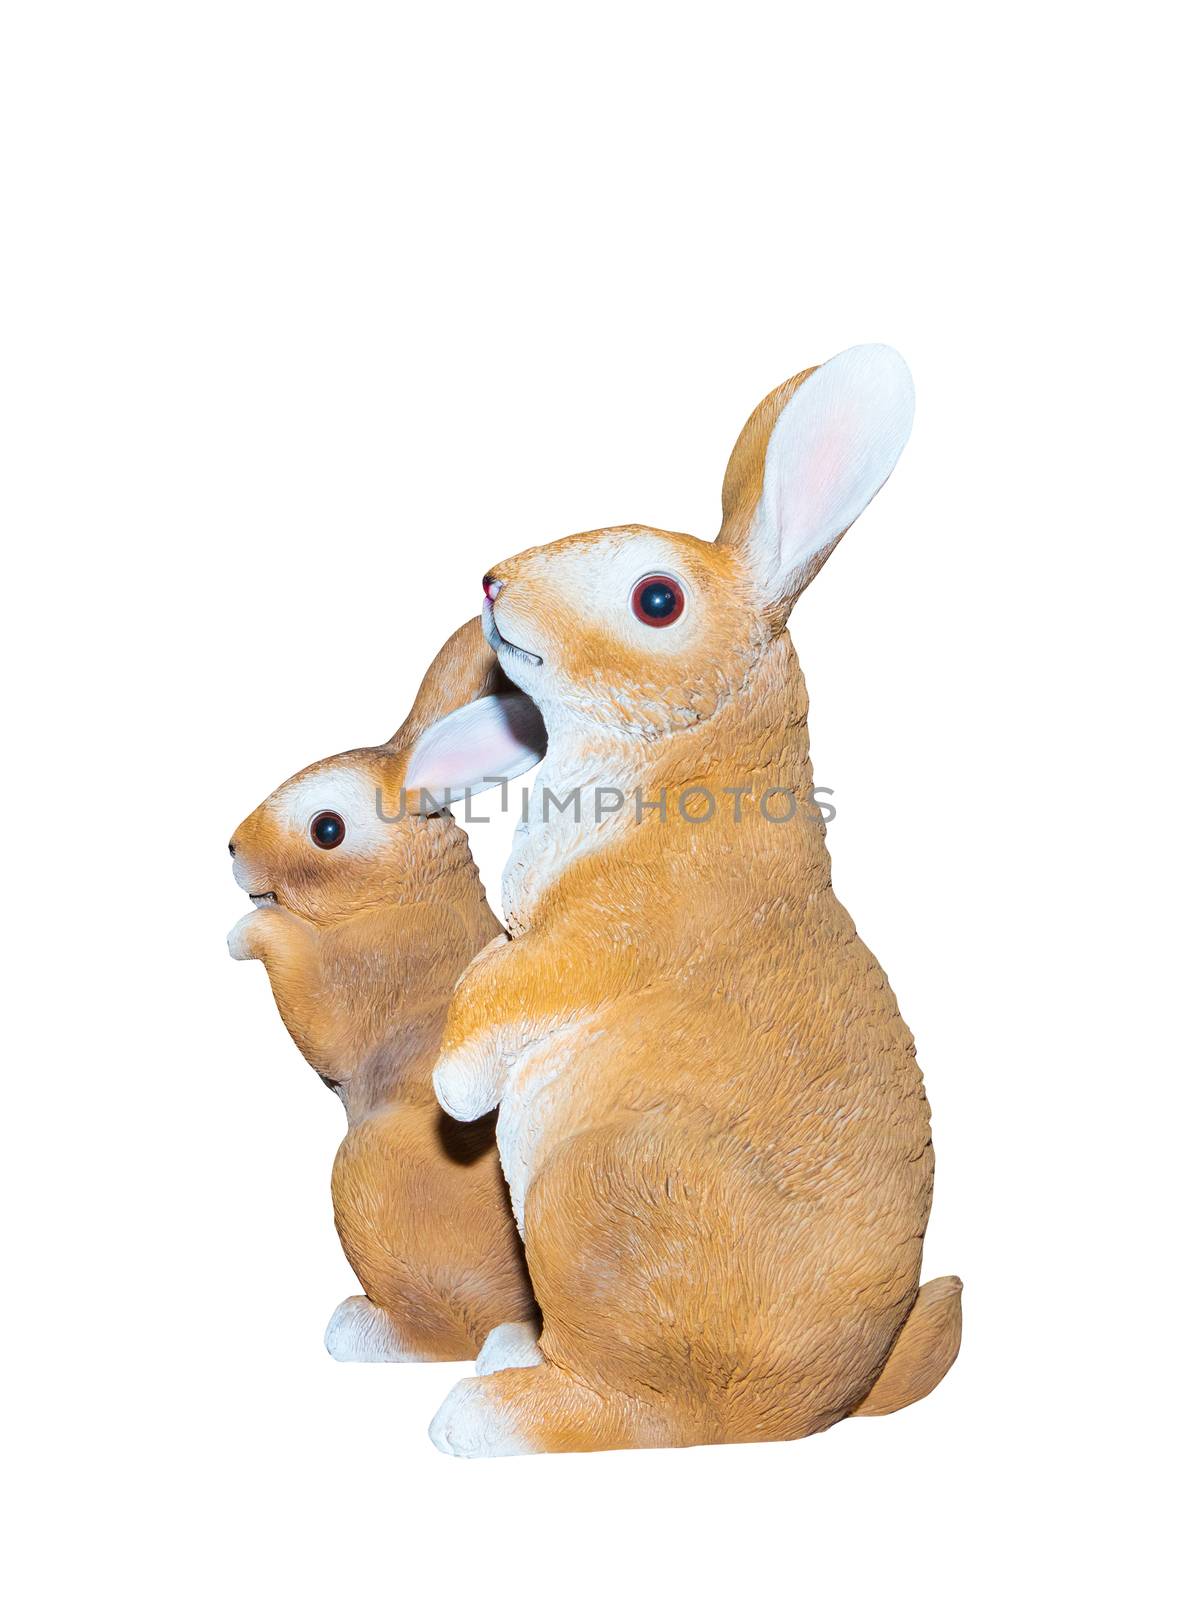 Two rabbits dolly toy is standing isolated on a white background by pramot